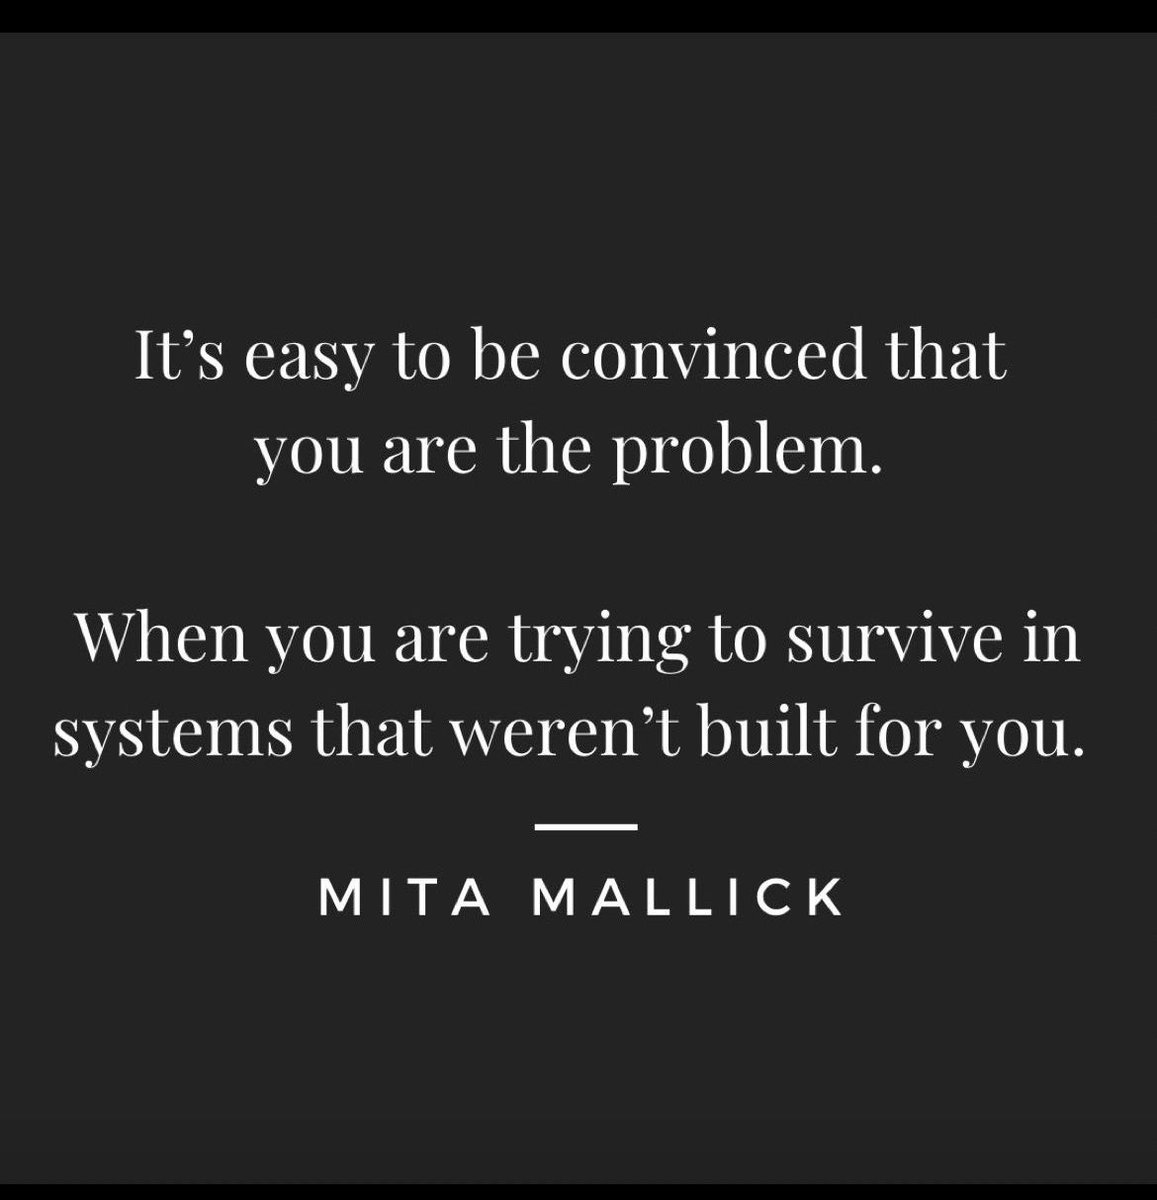 THIS! “And it took me too long to realize that I was trying to survive in systems that weren’t built for me. I was never the problem. So now I don’t settle for environments that don’t accept, recognize, celebrate, lift up and honor what I bring to the table.” @MitaMallick2